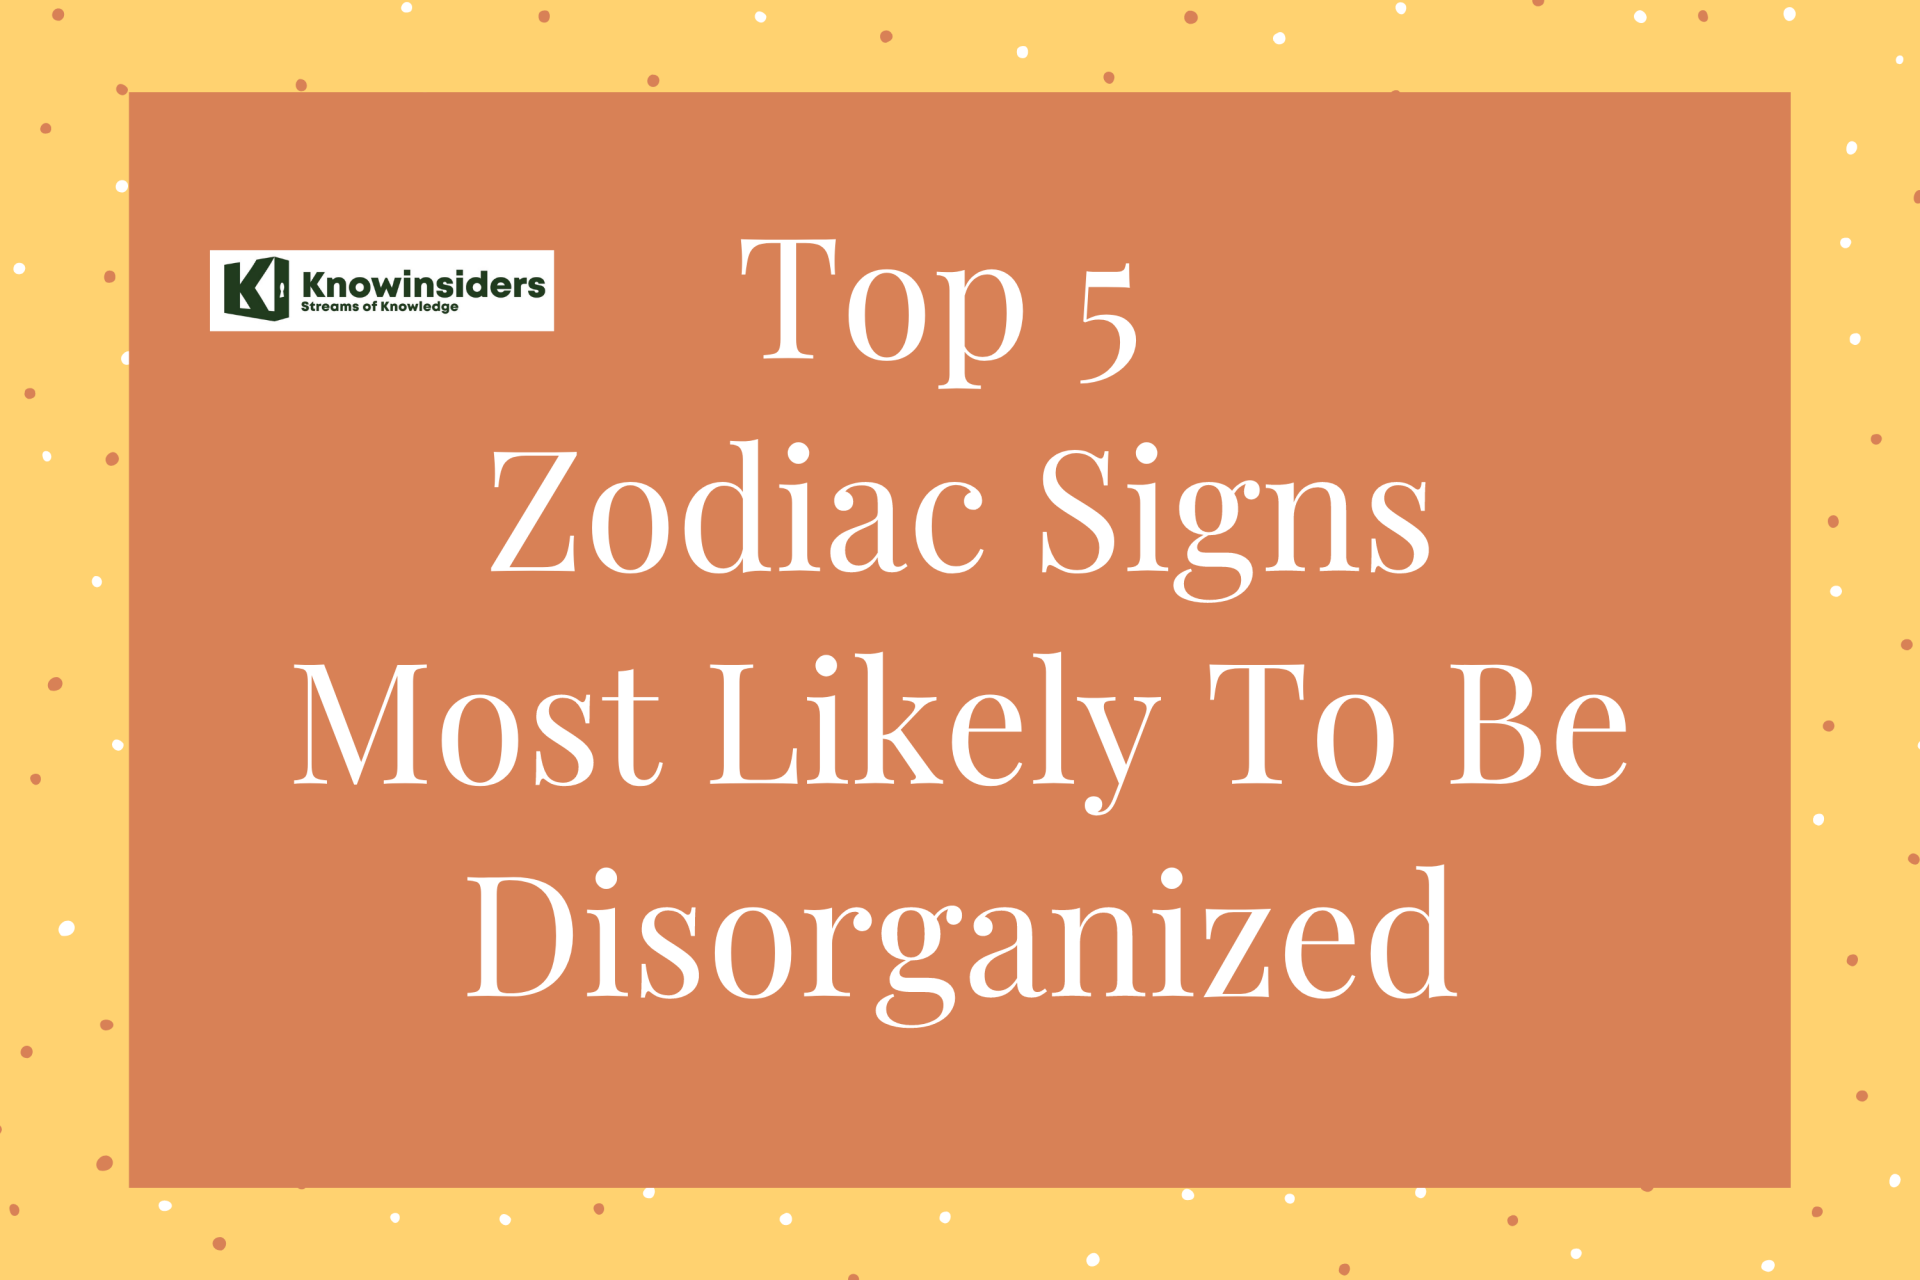 Disorganzied and Messiest Zodiax Signs. Photo: KnowInsiders